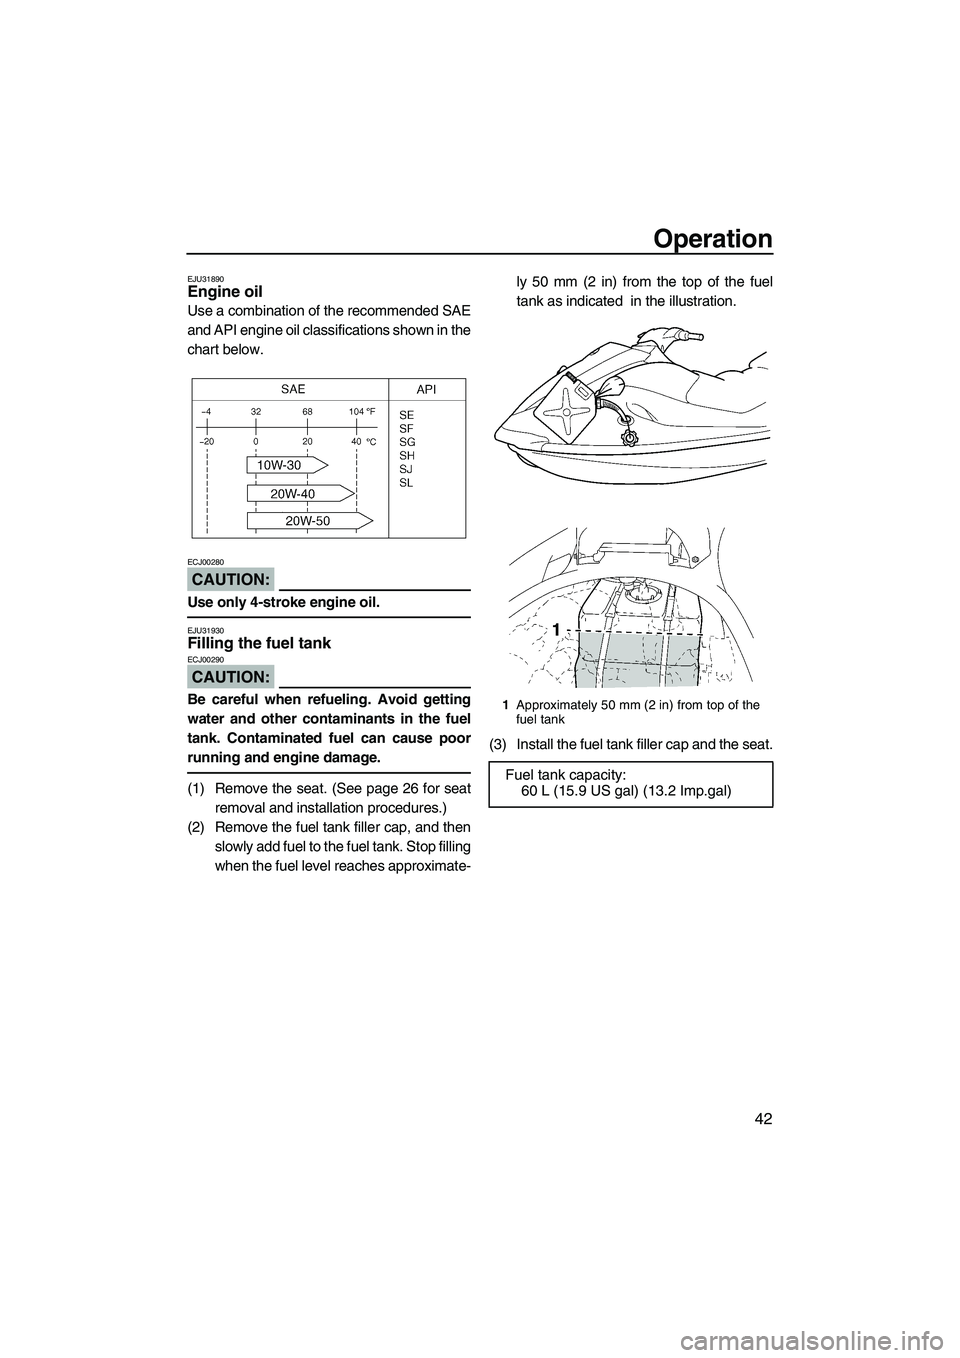 YAMAHA VX CRUISER 2007  Owners Manual Operation
42
EJU31890Engine oil 
Use a combination of the recommended SAE
and API engine oil classifications shown in the
chart below.
CAUTION:
ECJ00280
Use only 4-stroke engine oil.
EJU31930Filling t